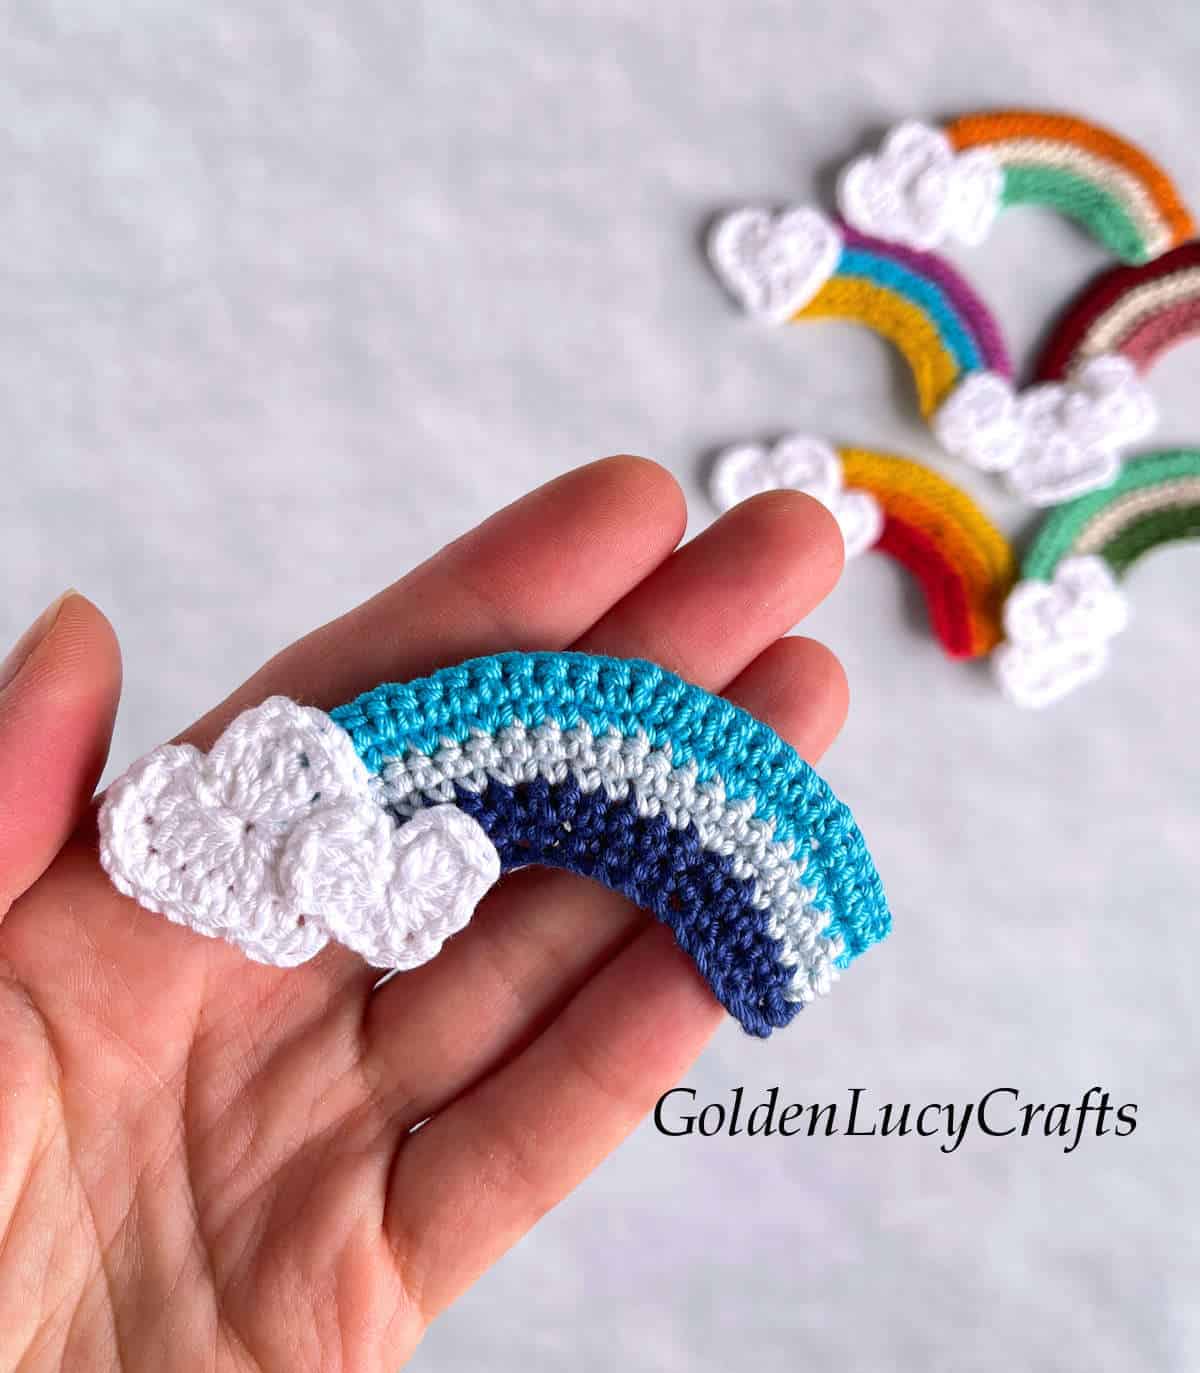 Crochet rainbow applique in the palm of a hand.